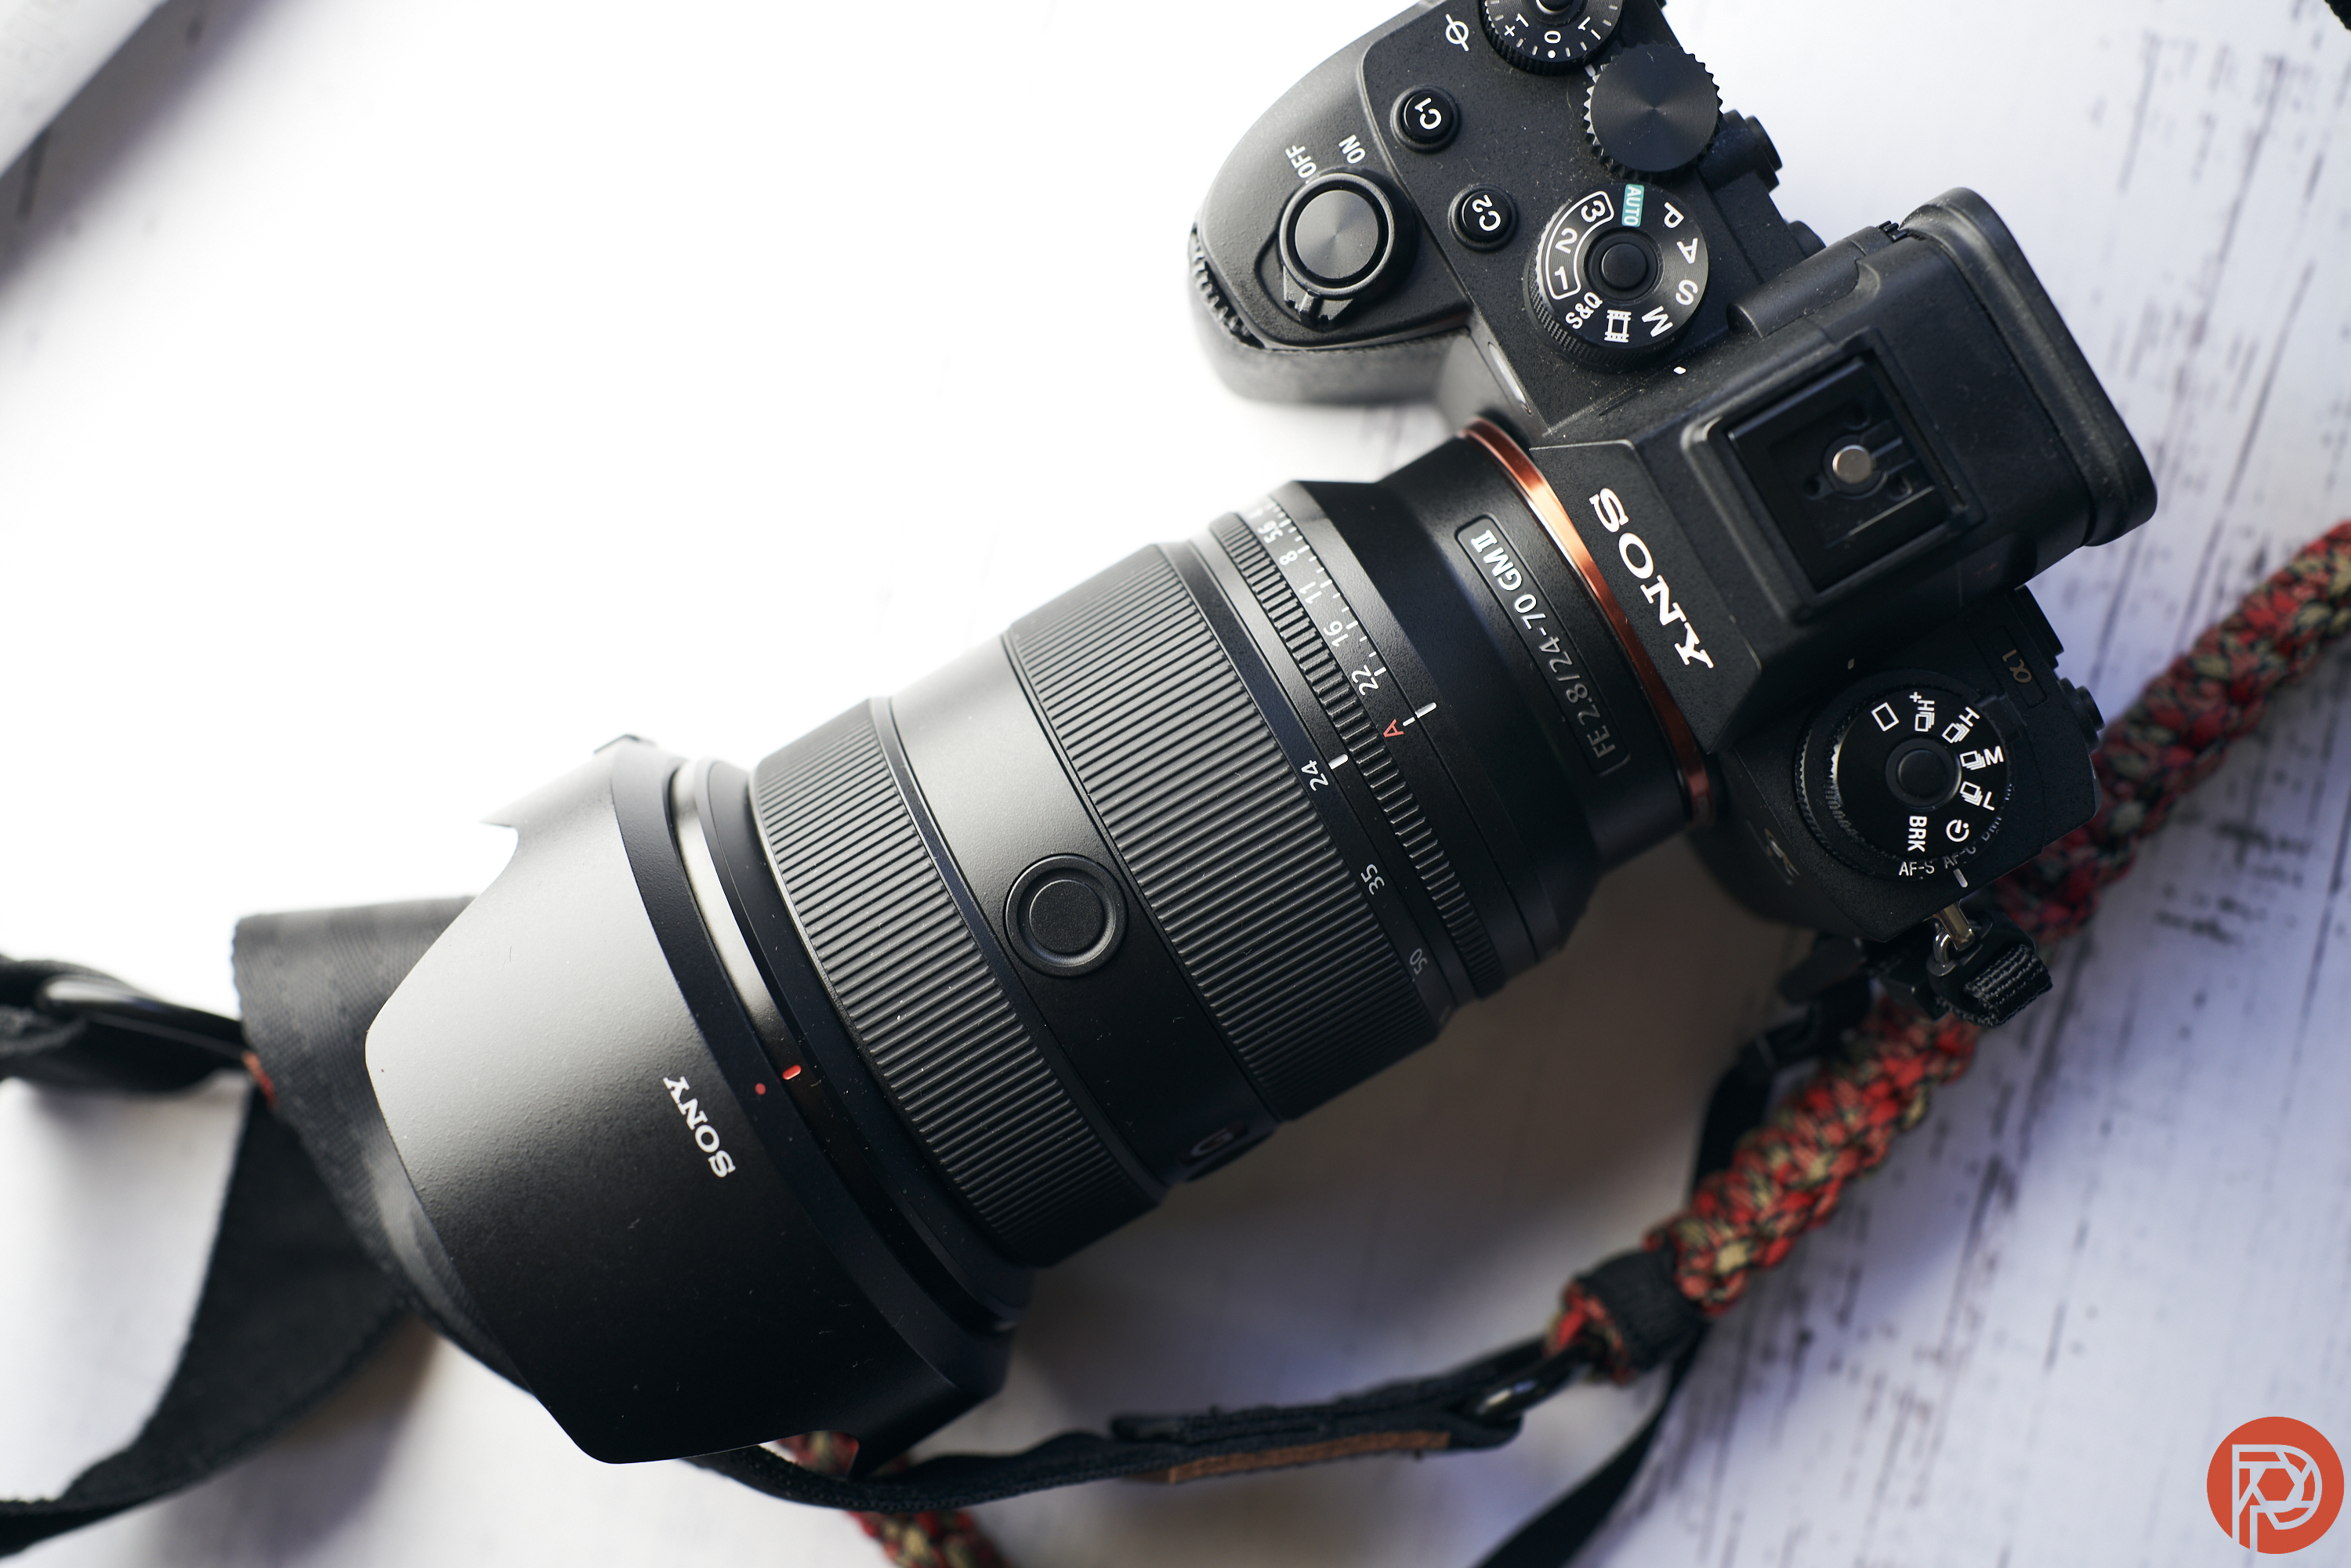 The Sony 24-70mm f2.8 GM II Works Great With These Cameras